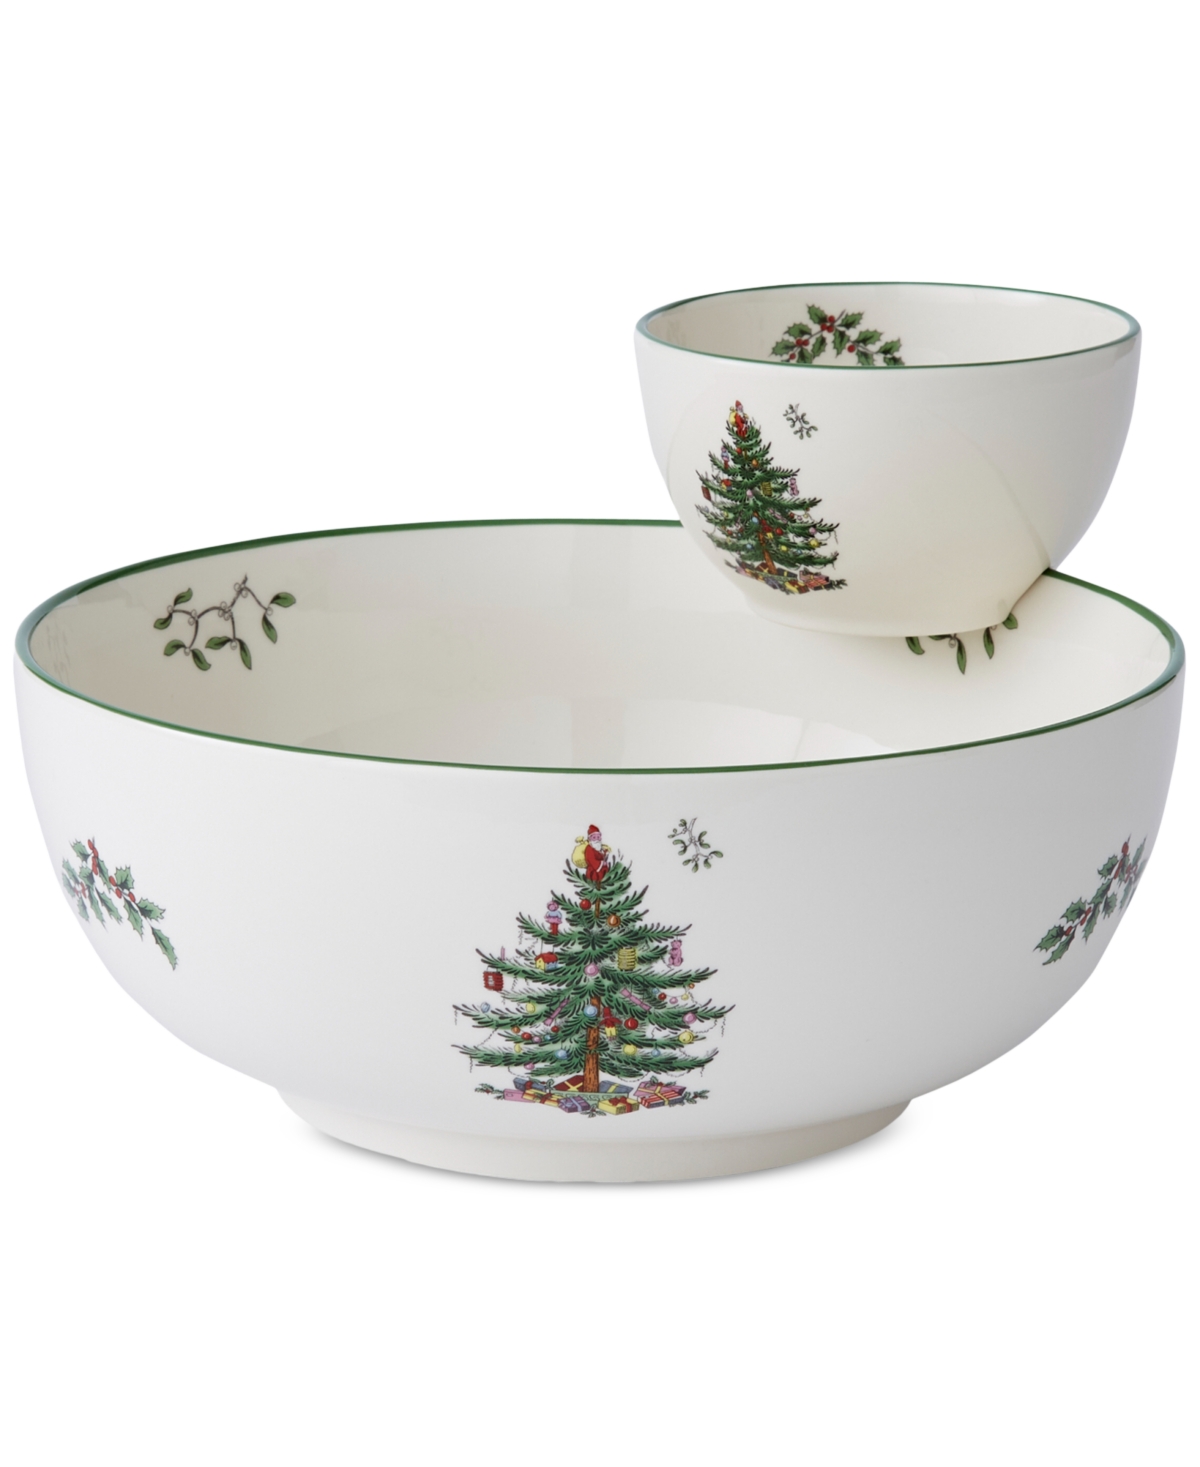 Spode Christmas Tree Tiered 2-pc. Porcelain Chip & Dip Set In Green